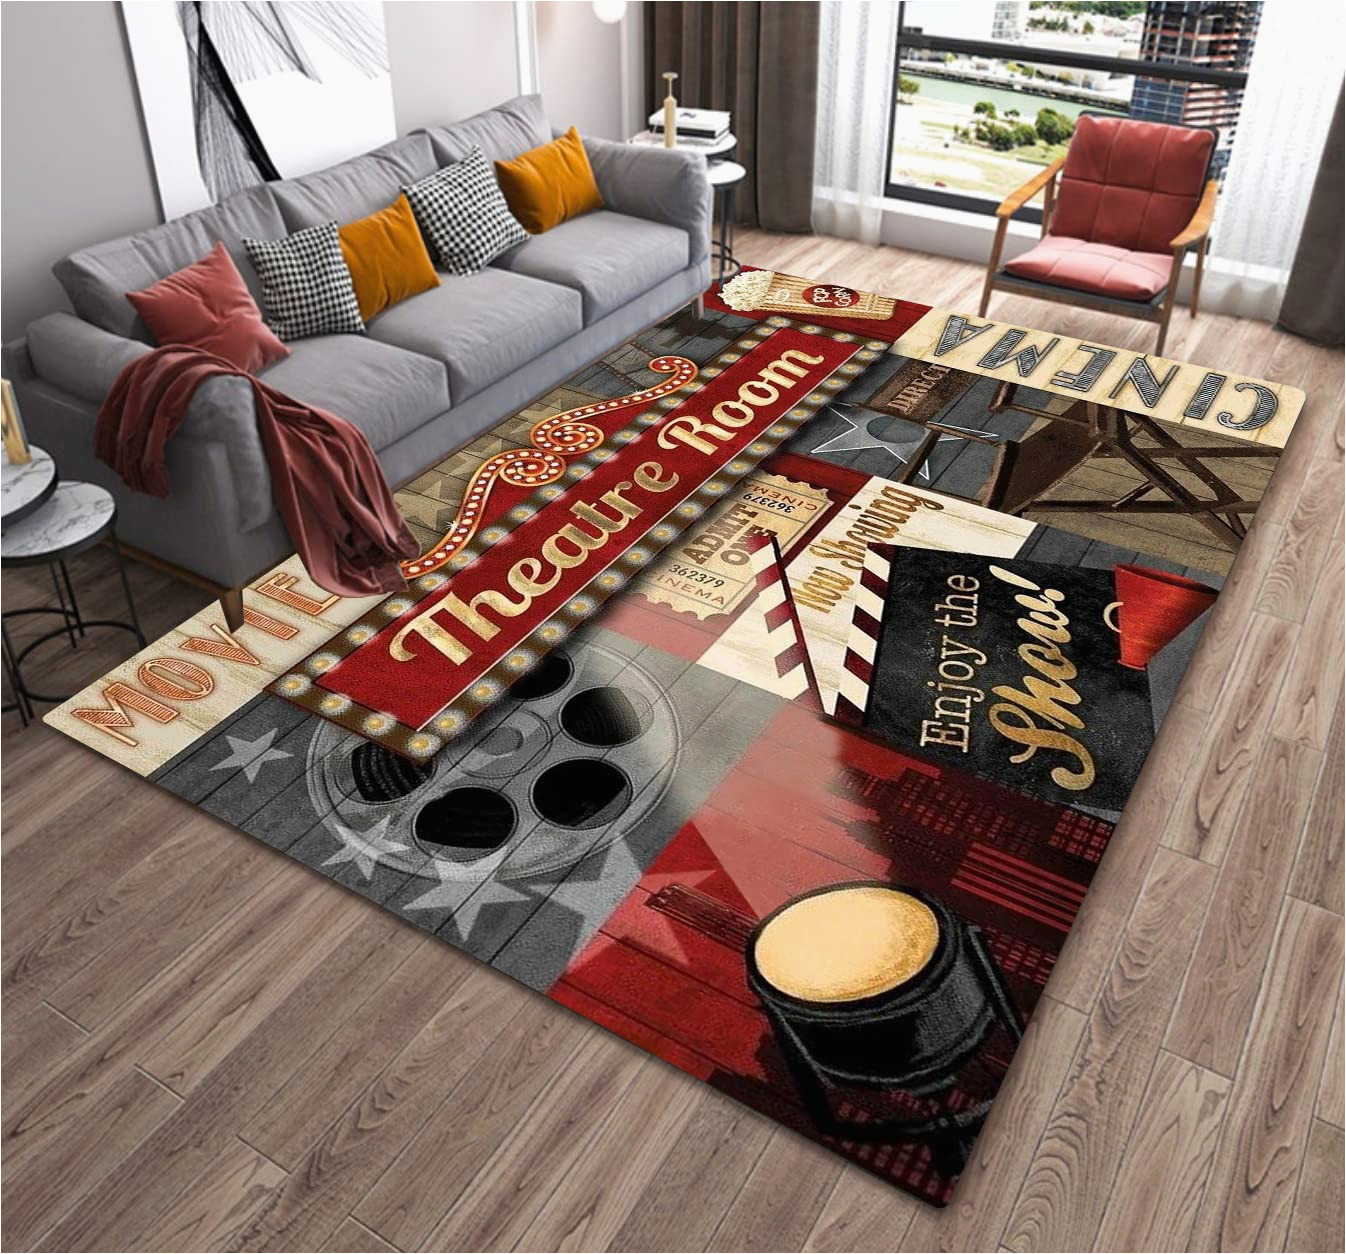 Movie theater themed area Rugs Vintage Home Movie theater Cinema Art Modern area Rugs soft Non-skid Indoor Carpet Throw Rugs Doormats Runner Rugs Luxury Fashion Home Decor for …